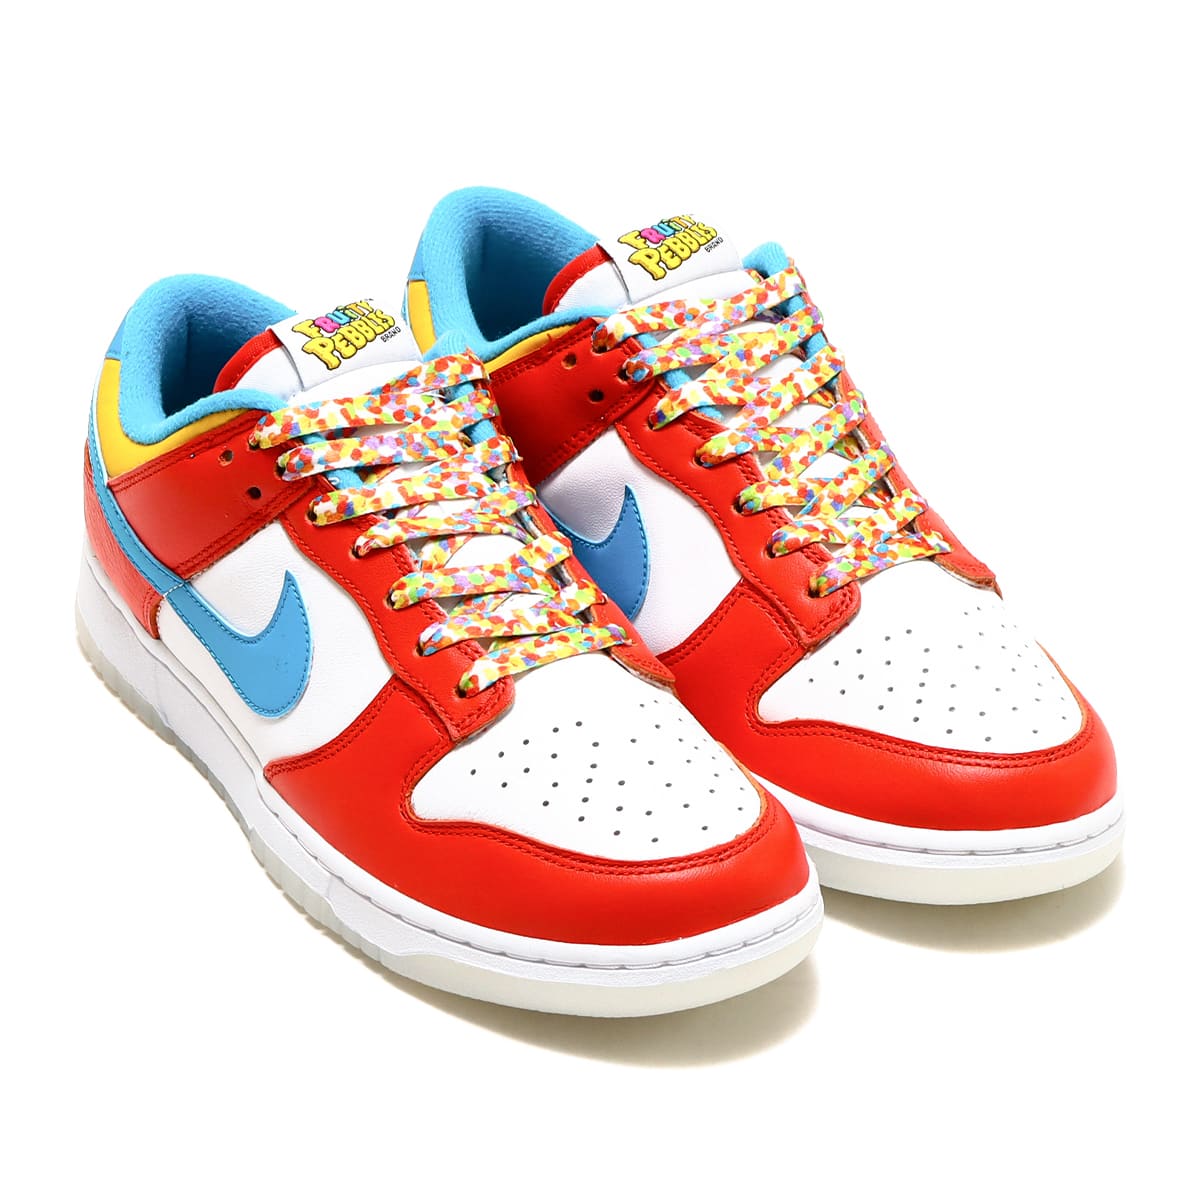 NIKE DUNK LOW QS HABANERO RED/LASER BLUE-WHITE 22FA-S